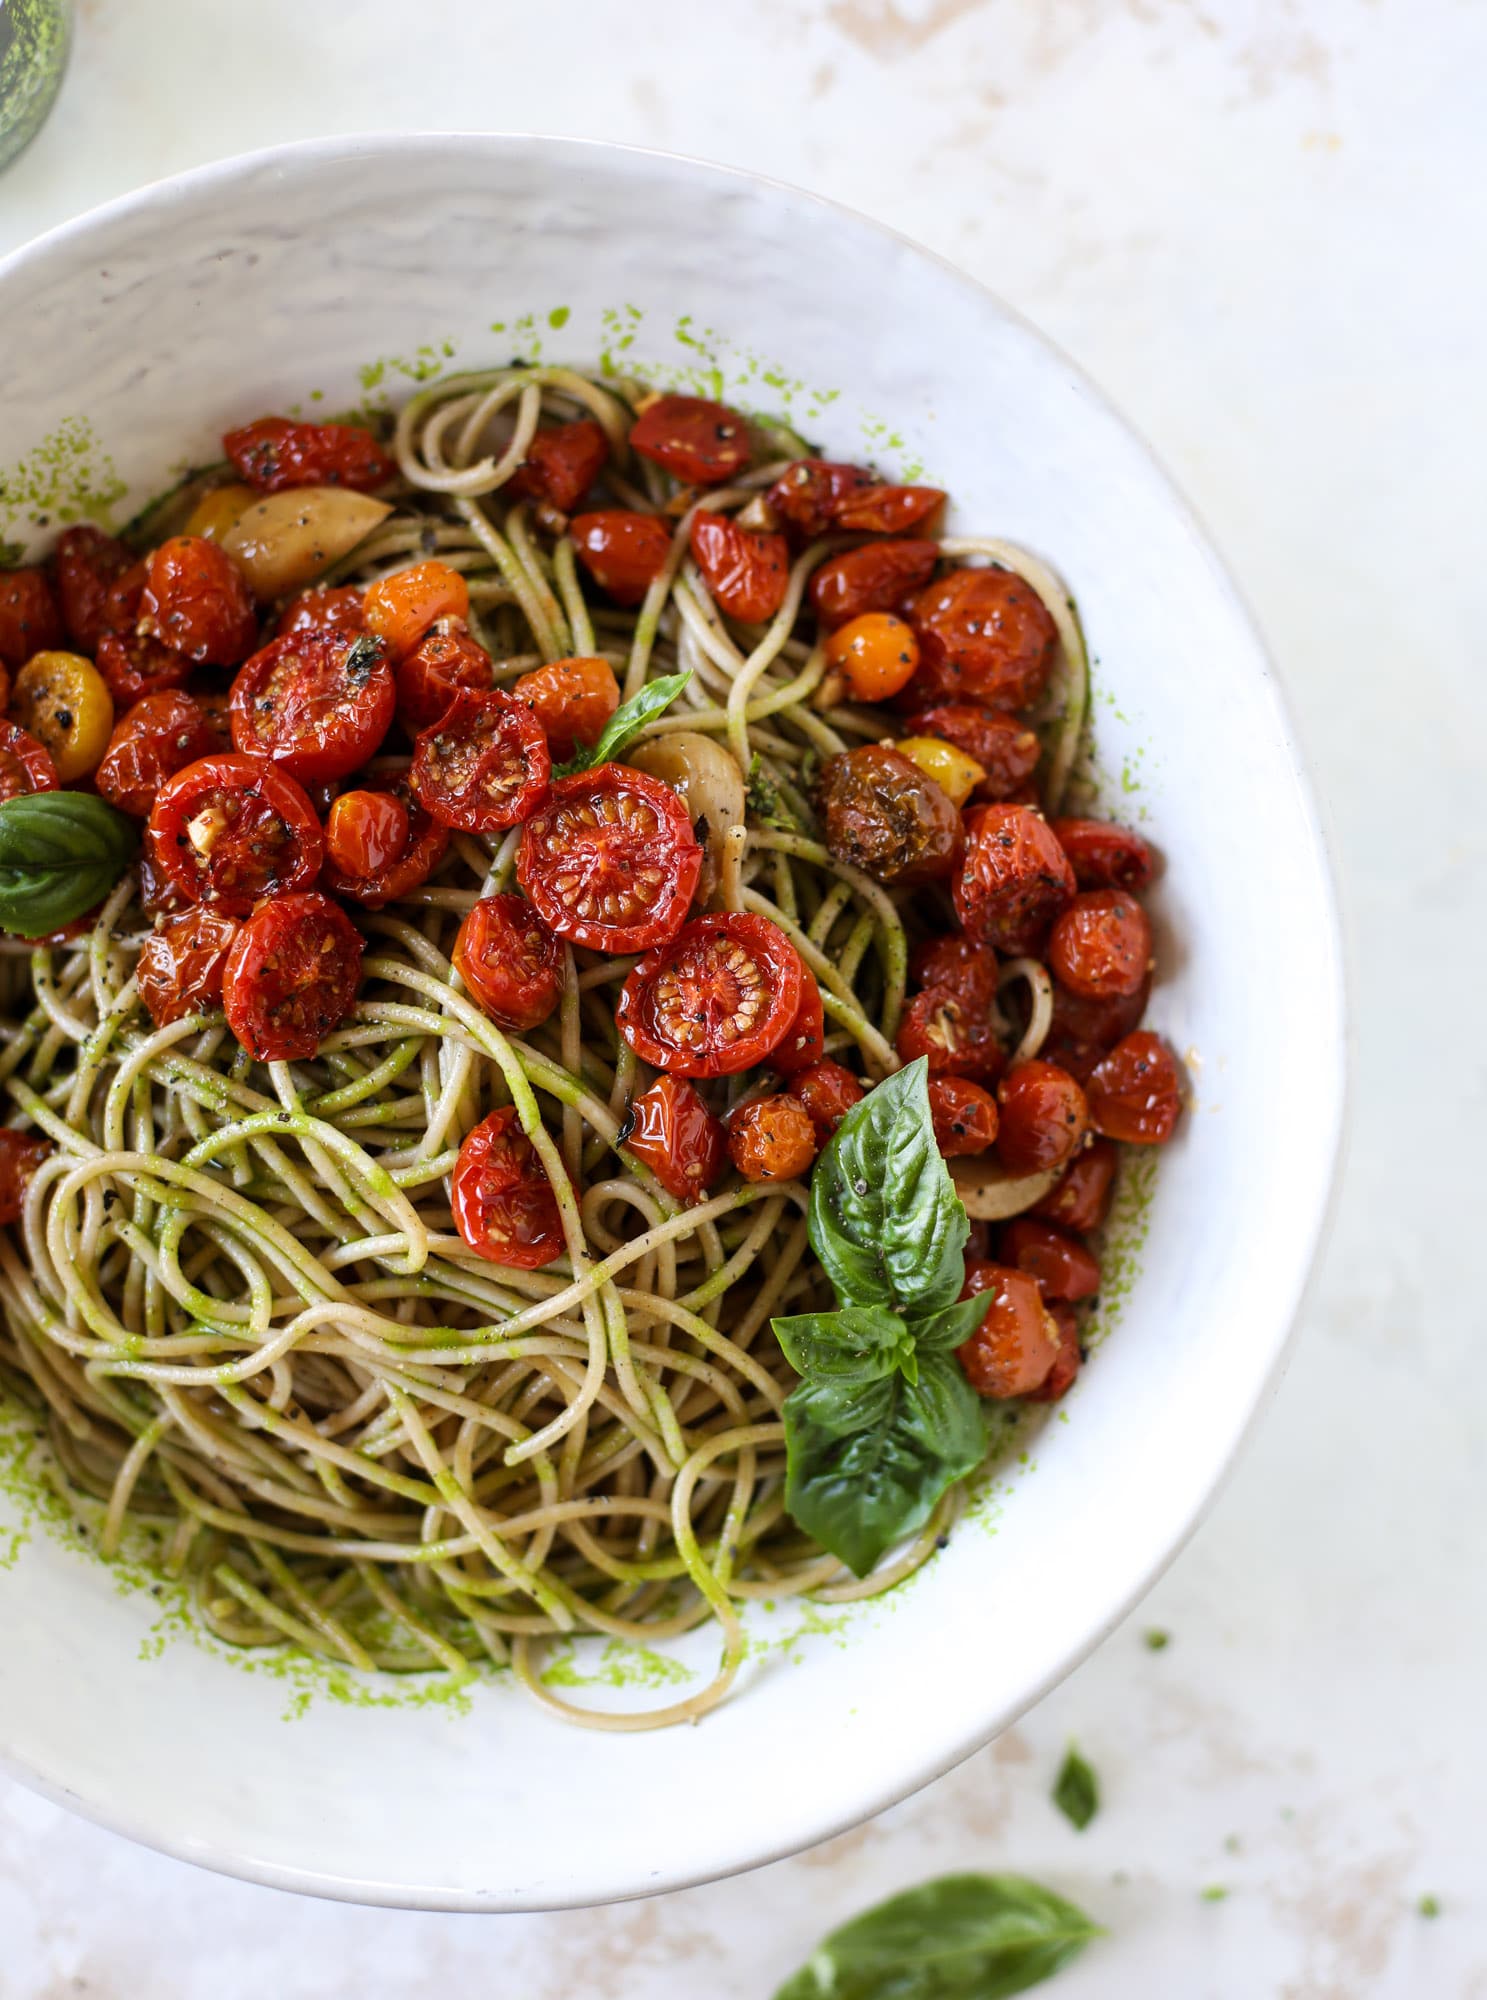 This tomato basil pasta is a labor of love! Made with slow roasted tomatoes, basil oil and tons of parmesan, it's ridiculously full of flavor.